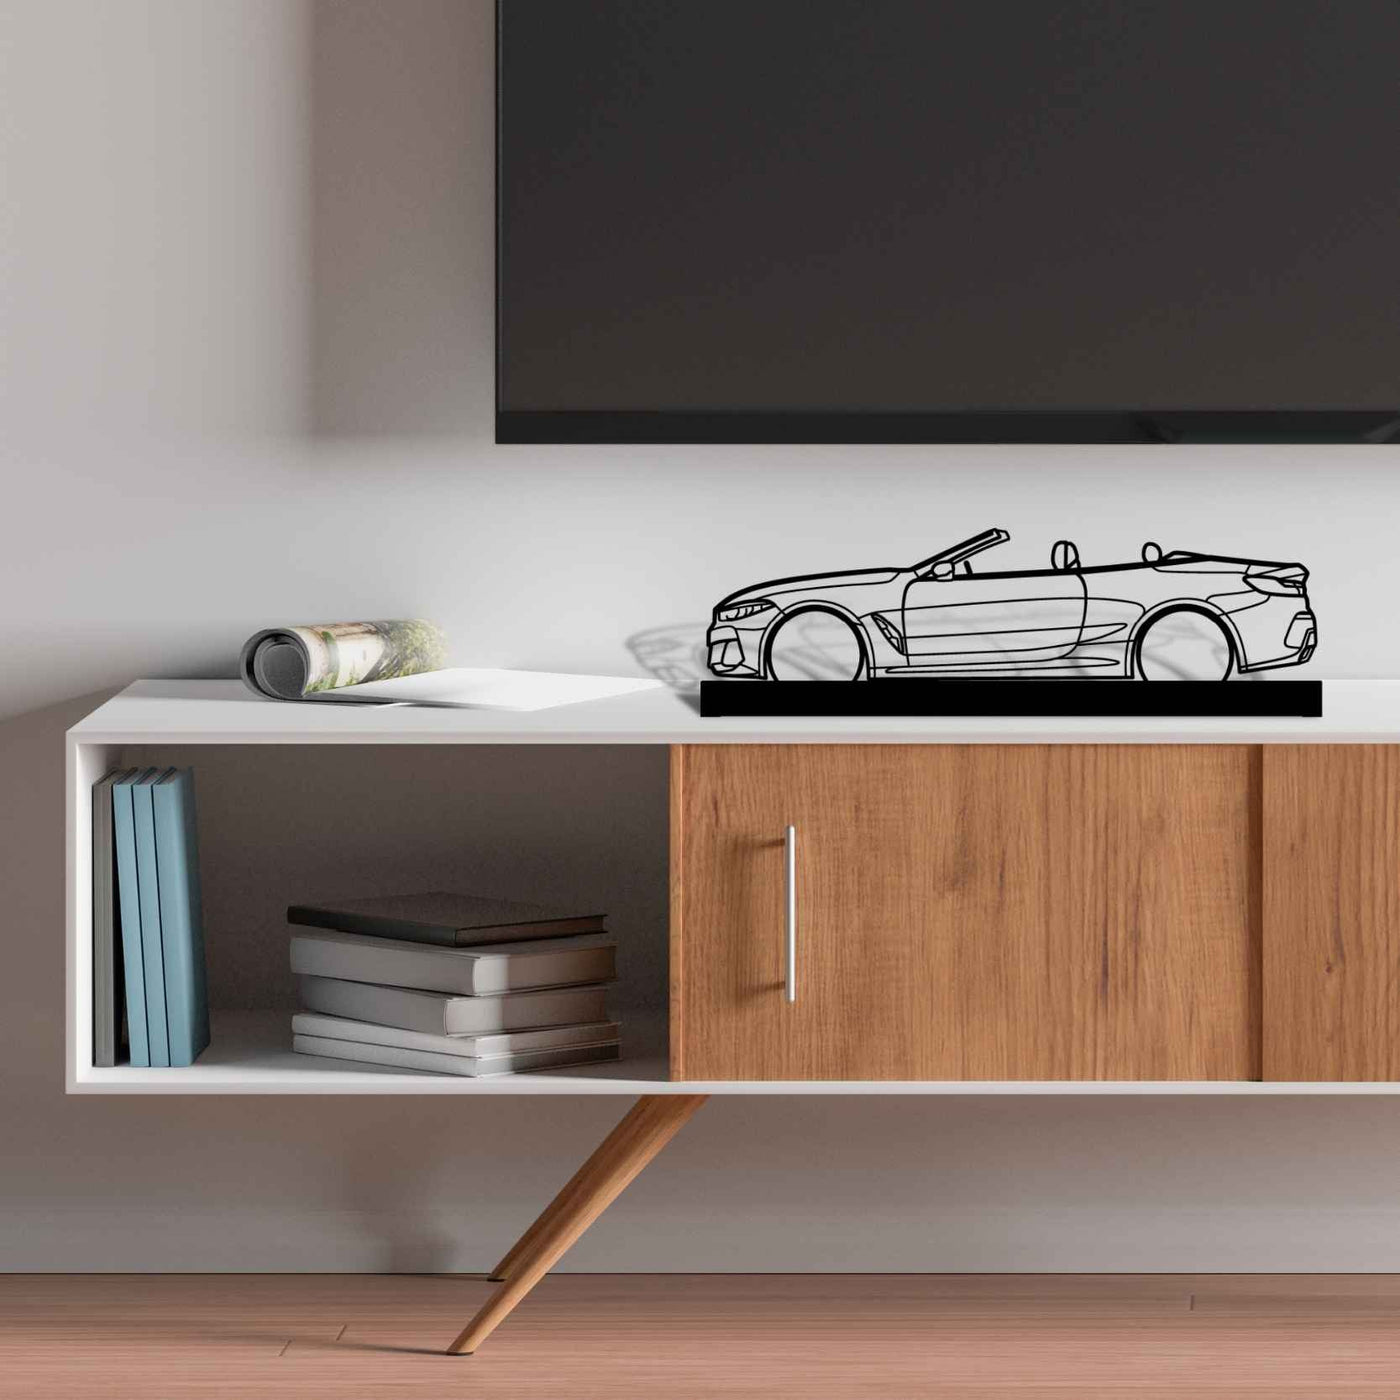 M850i Convertible Silhouette Metal Art Stand